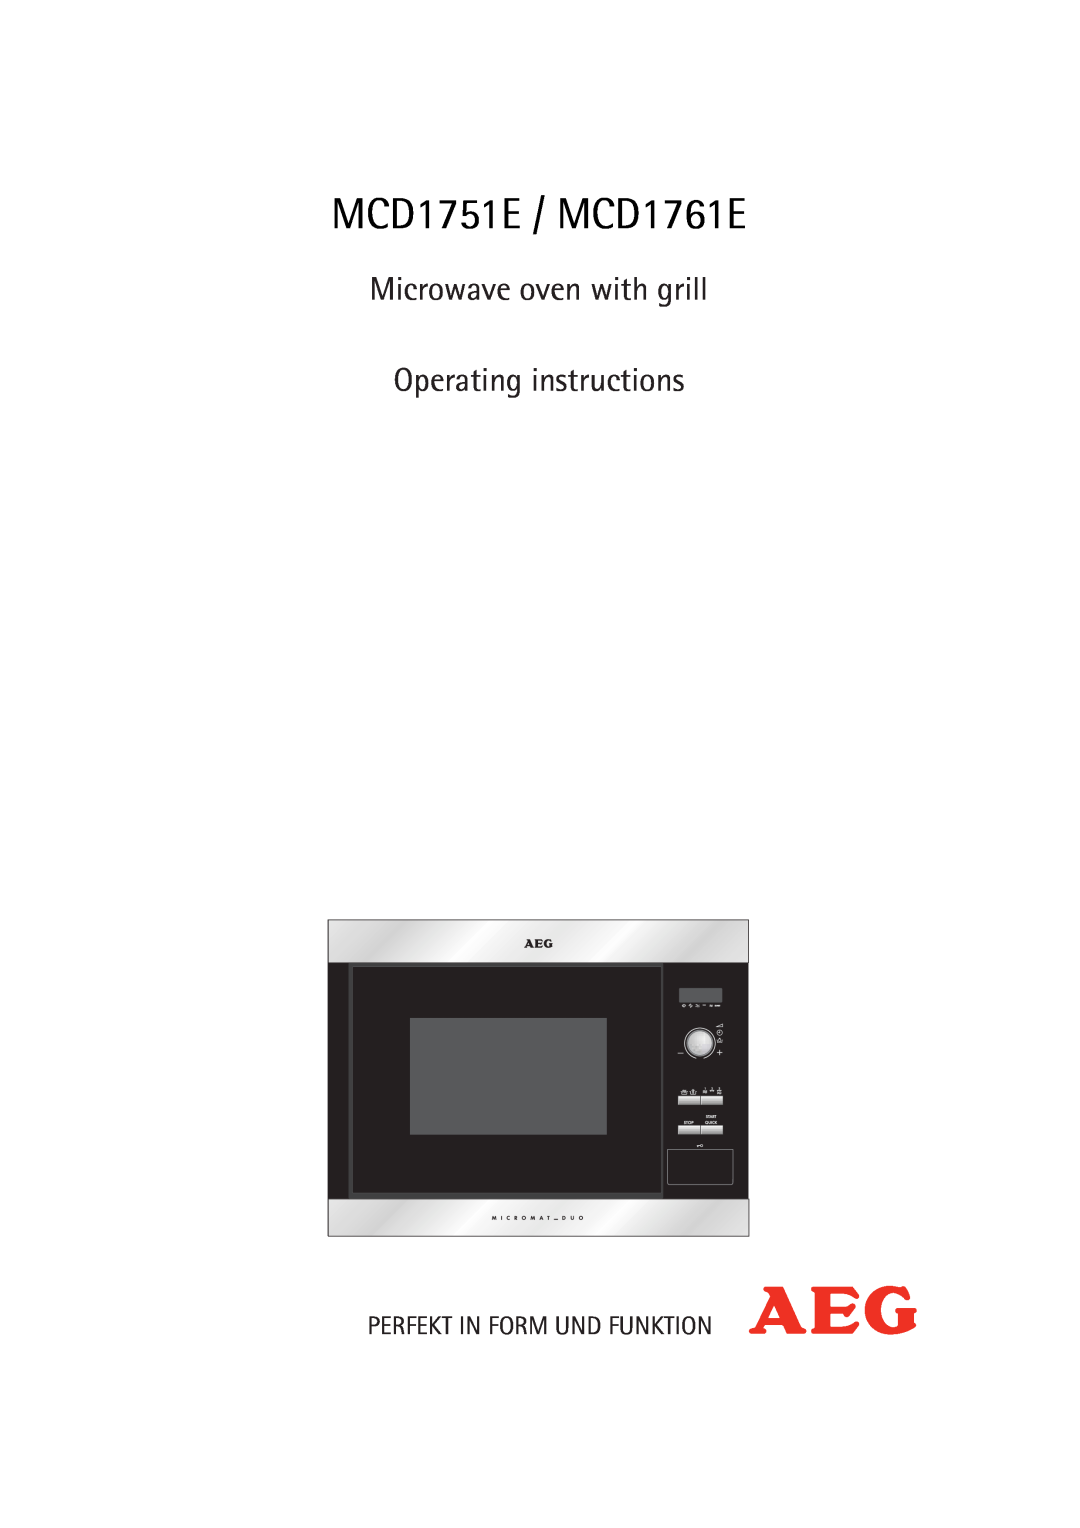 AEG manual MCD1751E / MCD1761E, Microwave oven with grill Operating instructions, Perfekt In Form Und Funktion 